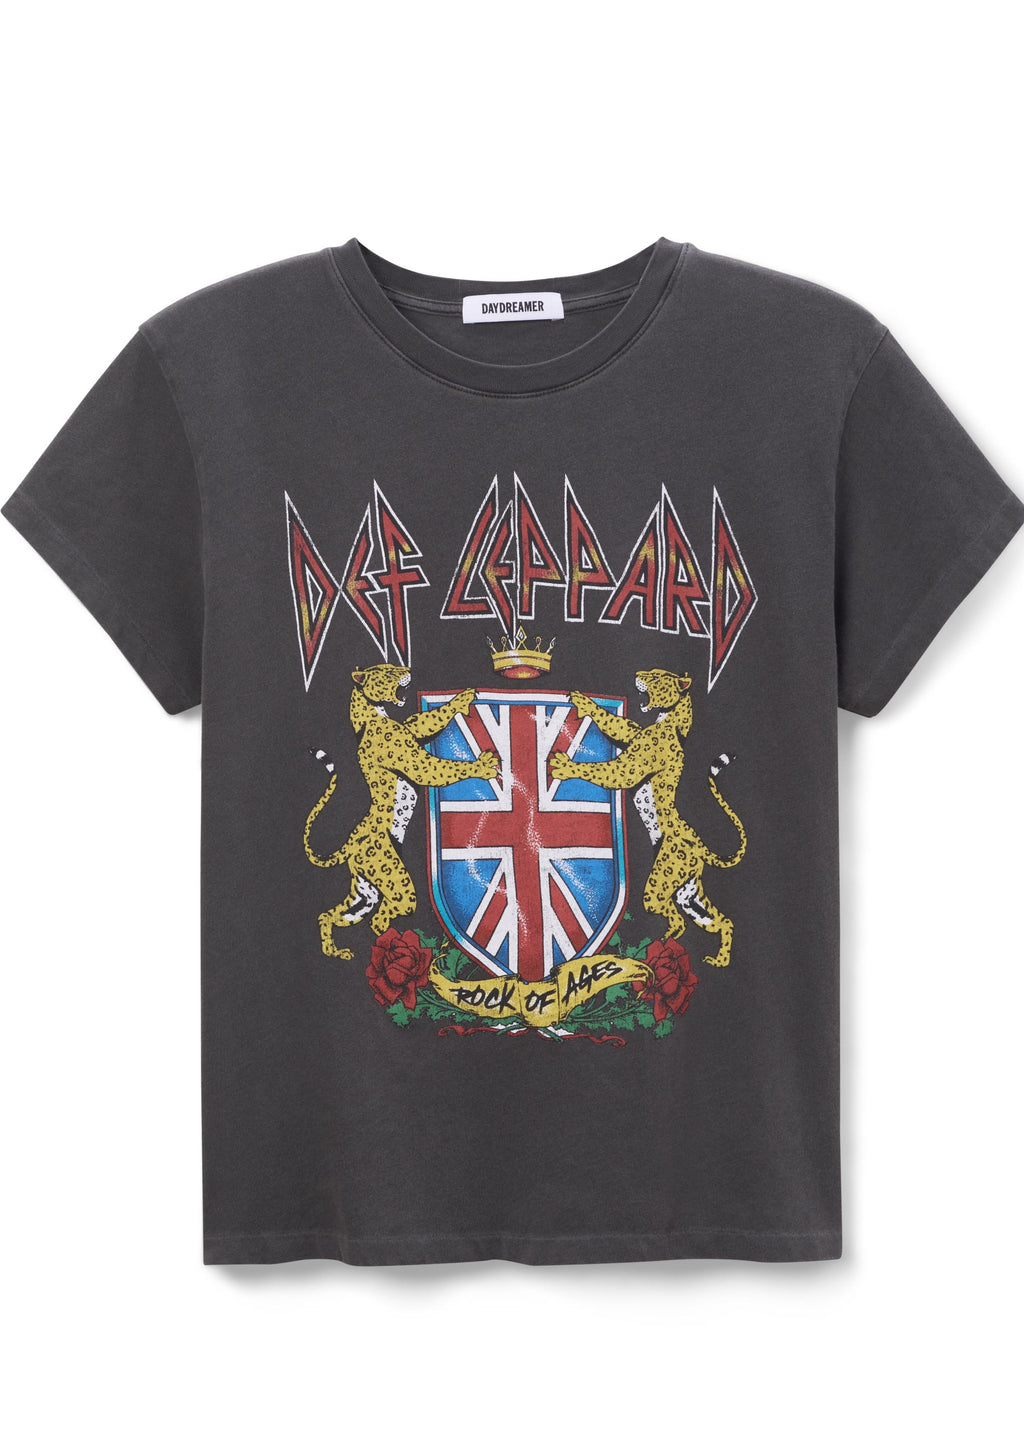 Def Leppard Rock Of Ages Tour Tee